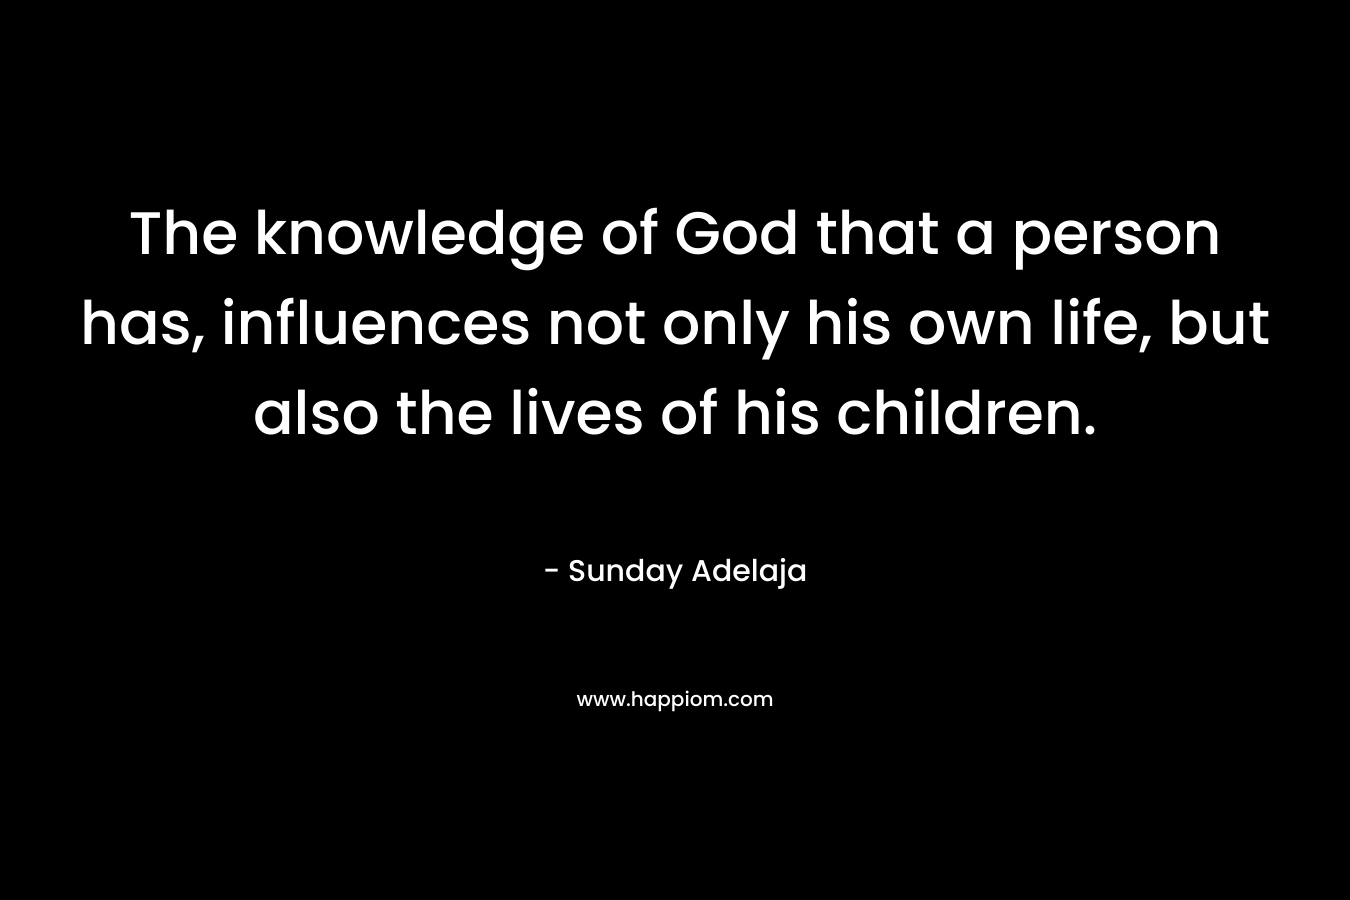 The knowledge of God that a person has, influences not only his own life, but also the lives of his children.